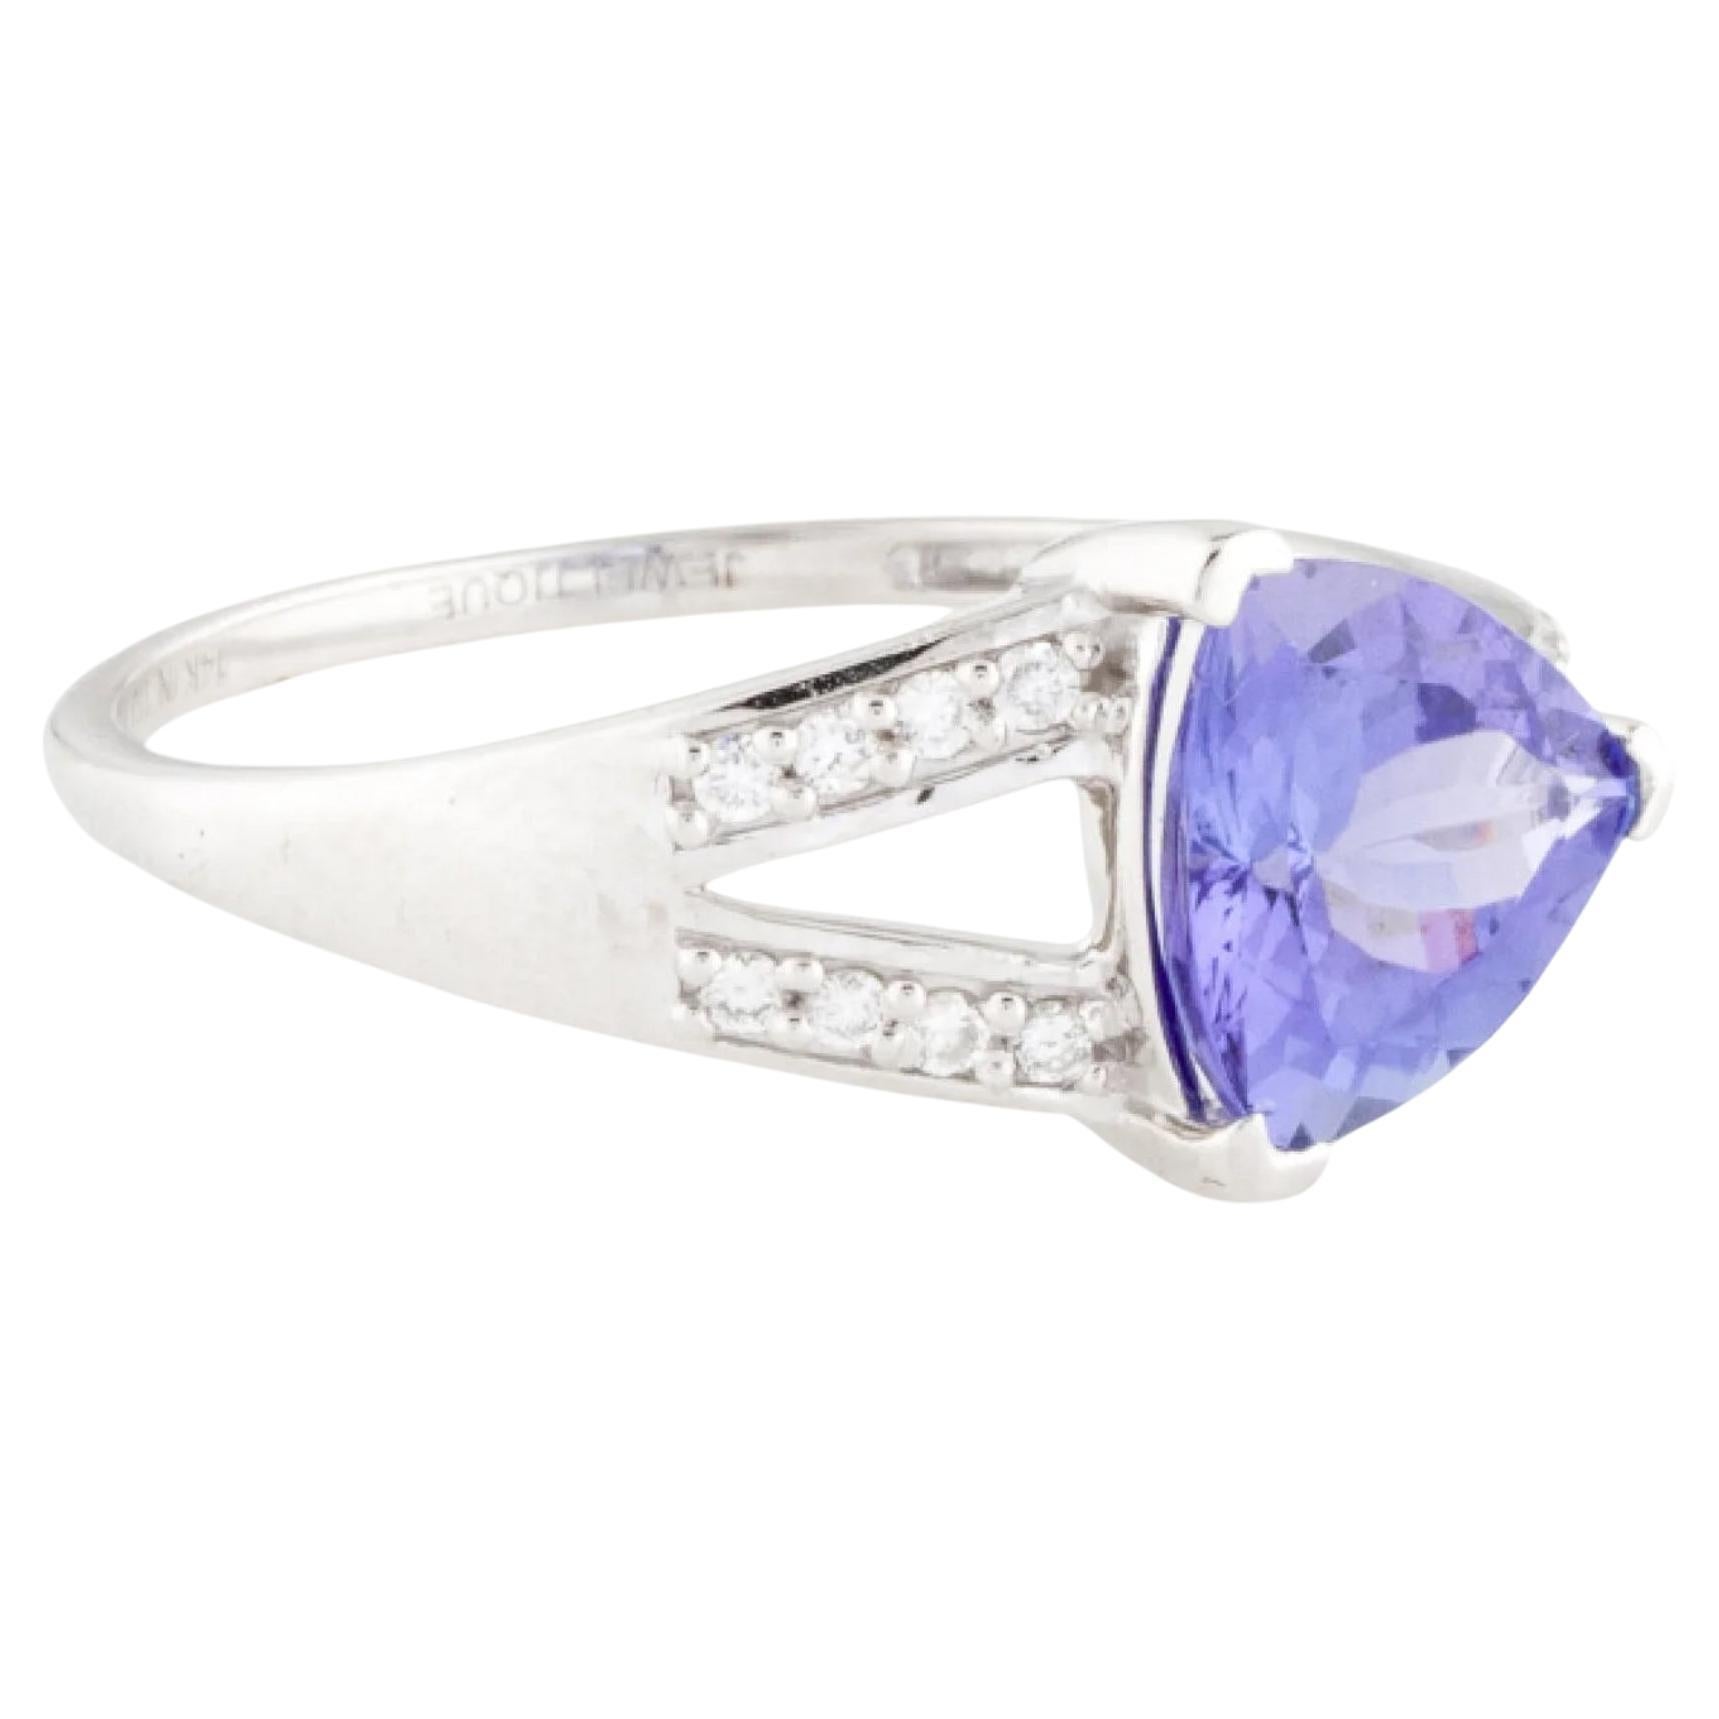 Exquisite 14K Tanzanite & Diamond Cocktail Ring, Size 7.25 - Statement Jewelry For Sale